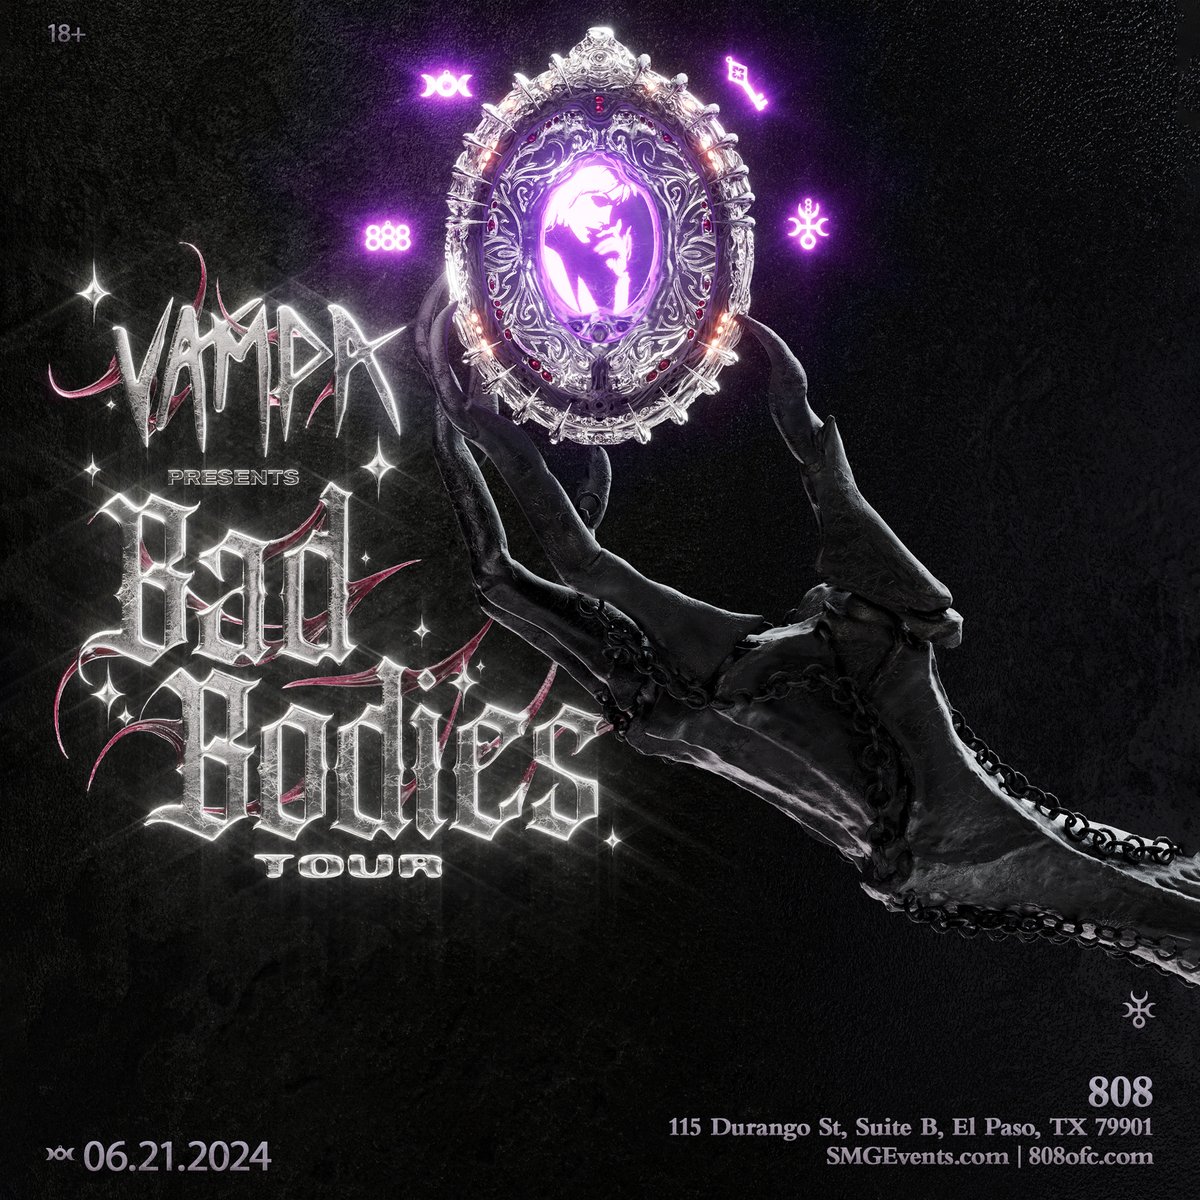 [Announcement] Presenting Bad Bodies Tour with VAMPA on Friday June 21, 2024 🦇 Tickets ON SALE NOW via SMGEvents.com | 808ofc.com 🎫 LIMITED CAPACITY — Ticket ensures entry 🪞